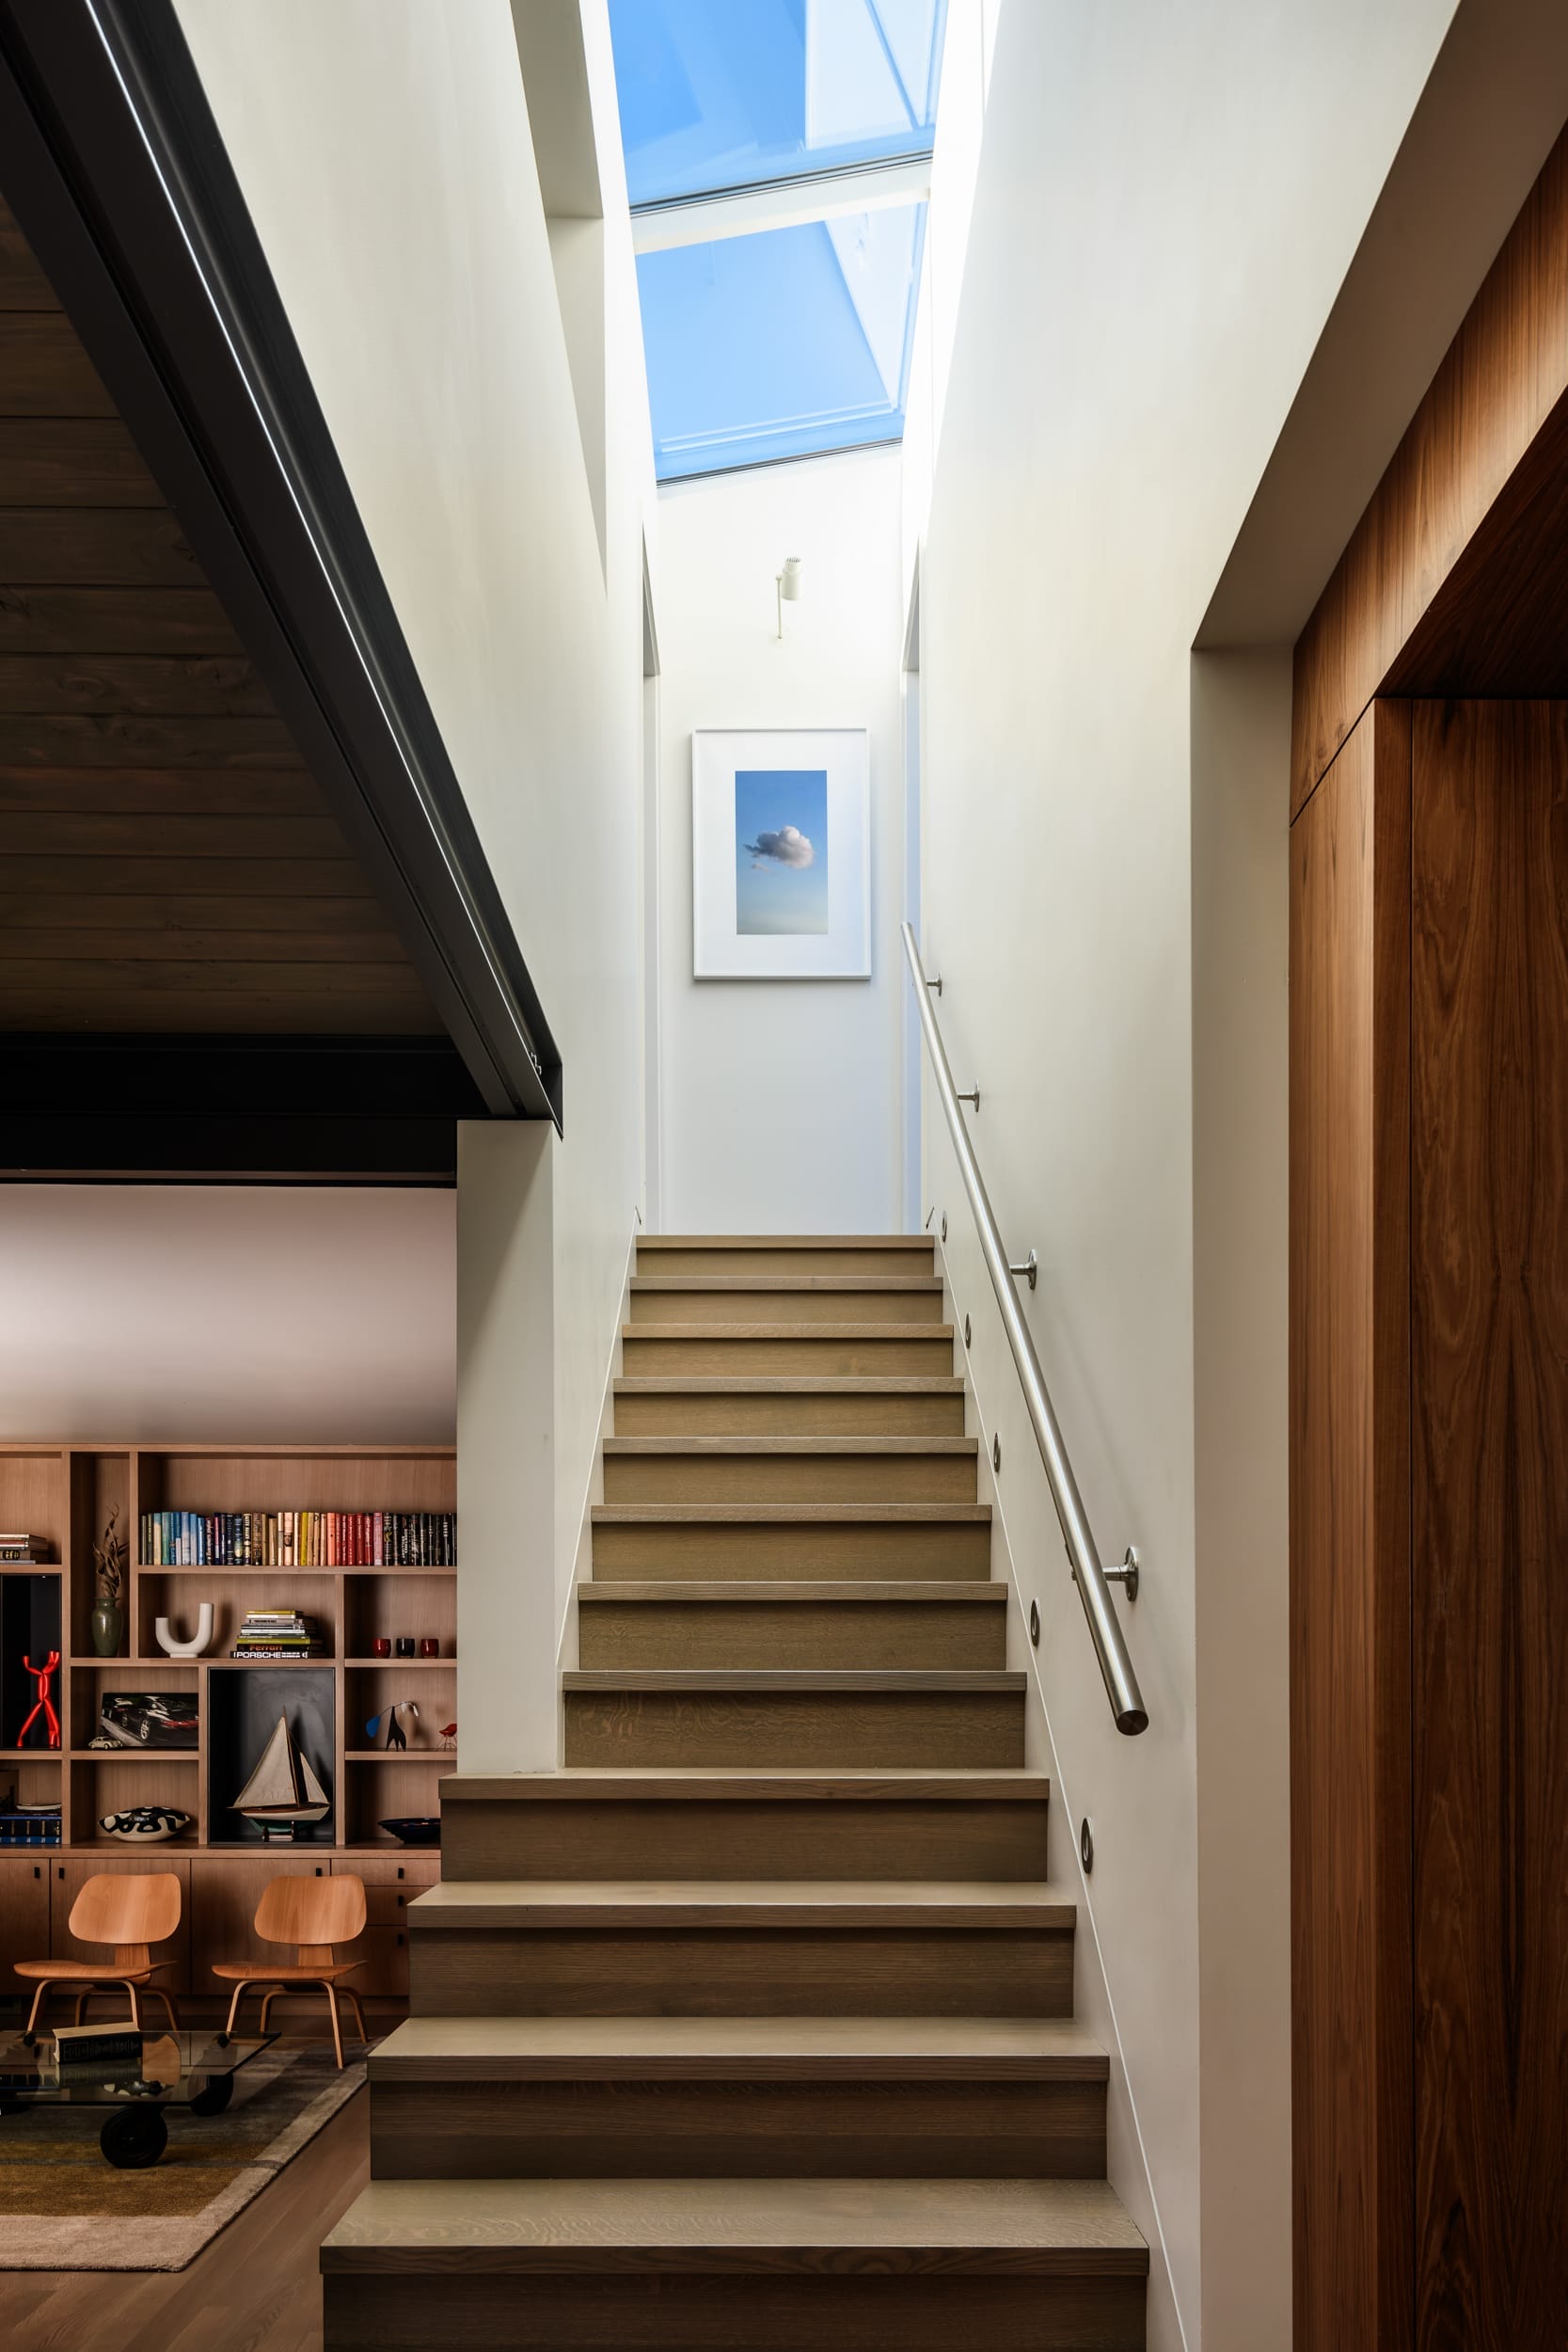 A staircase leading to a room with a skylight.